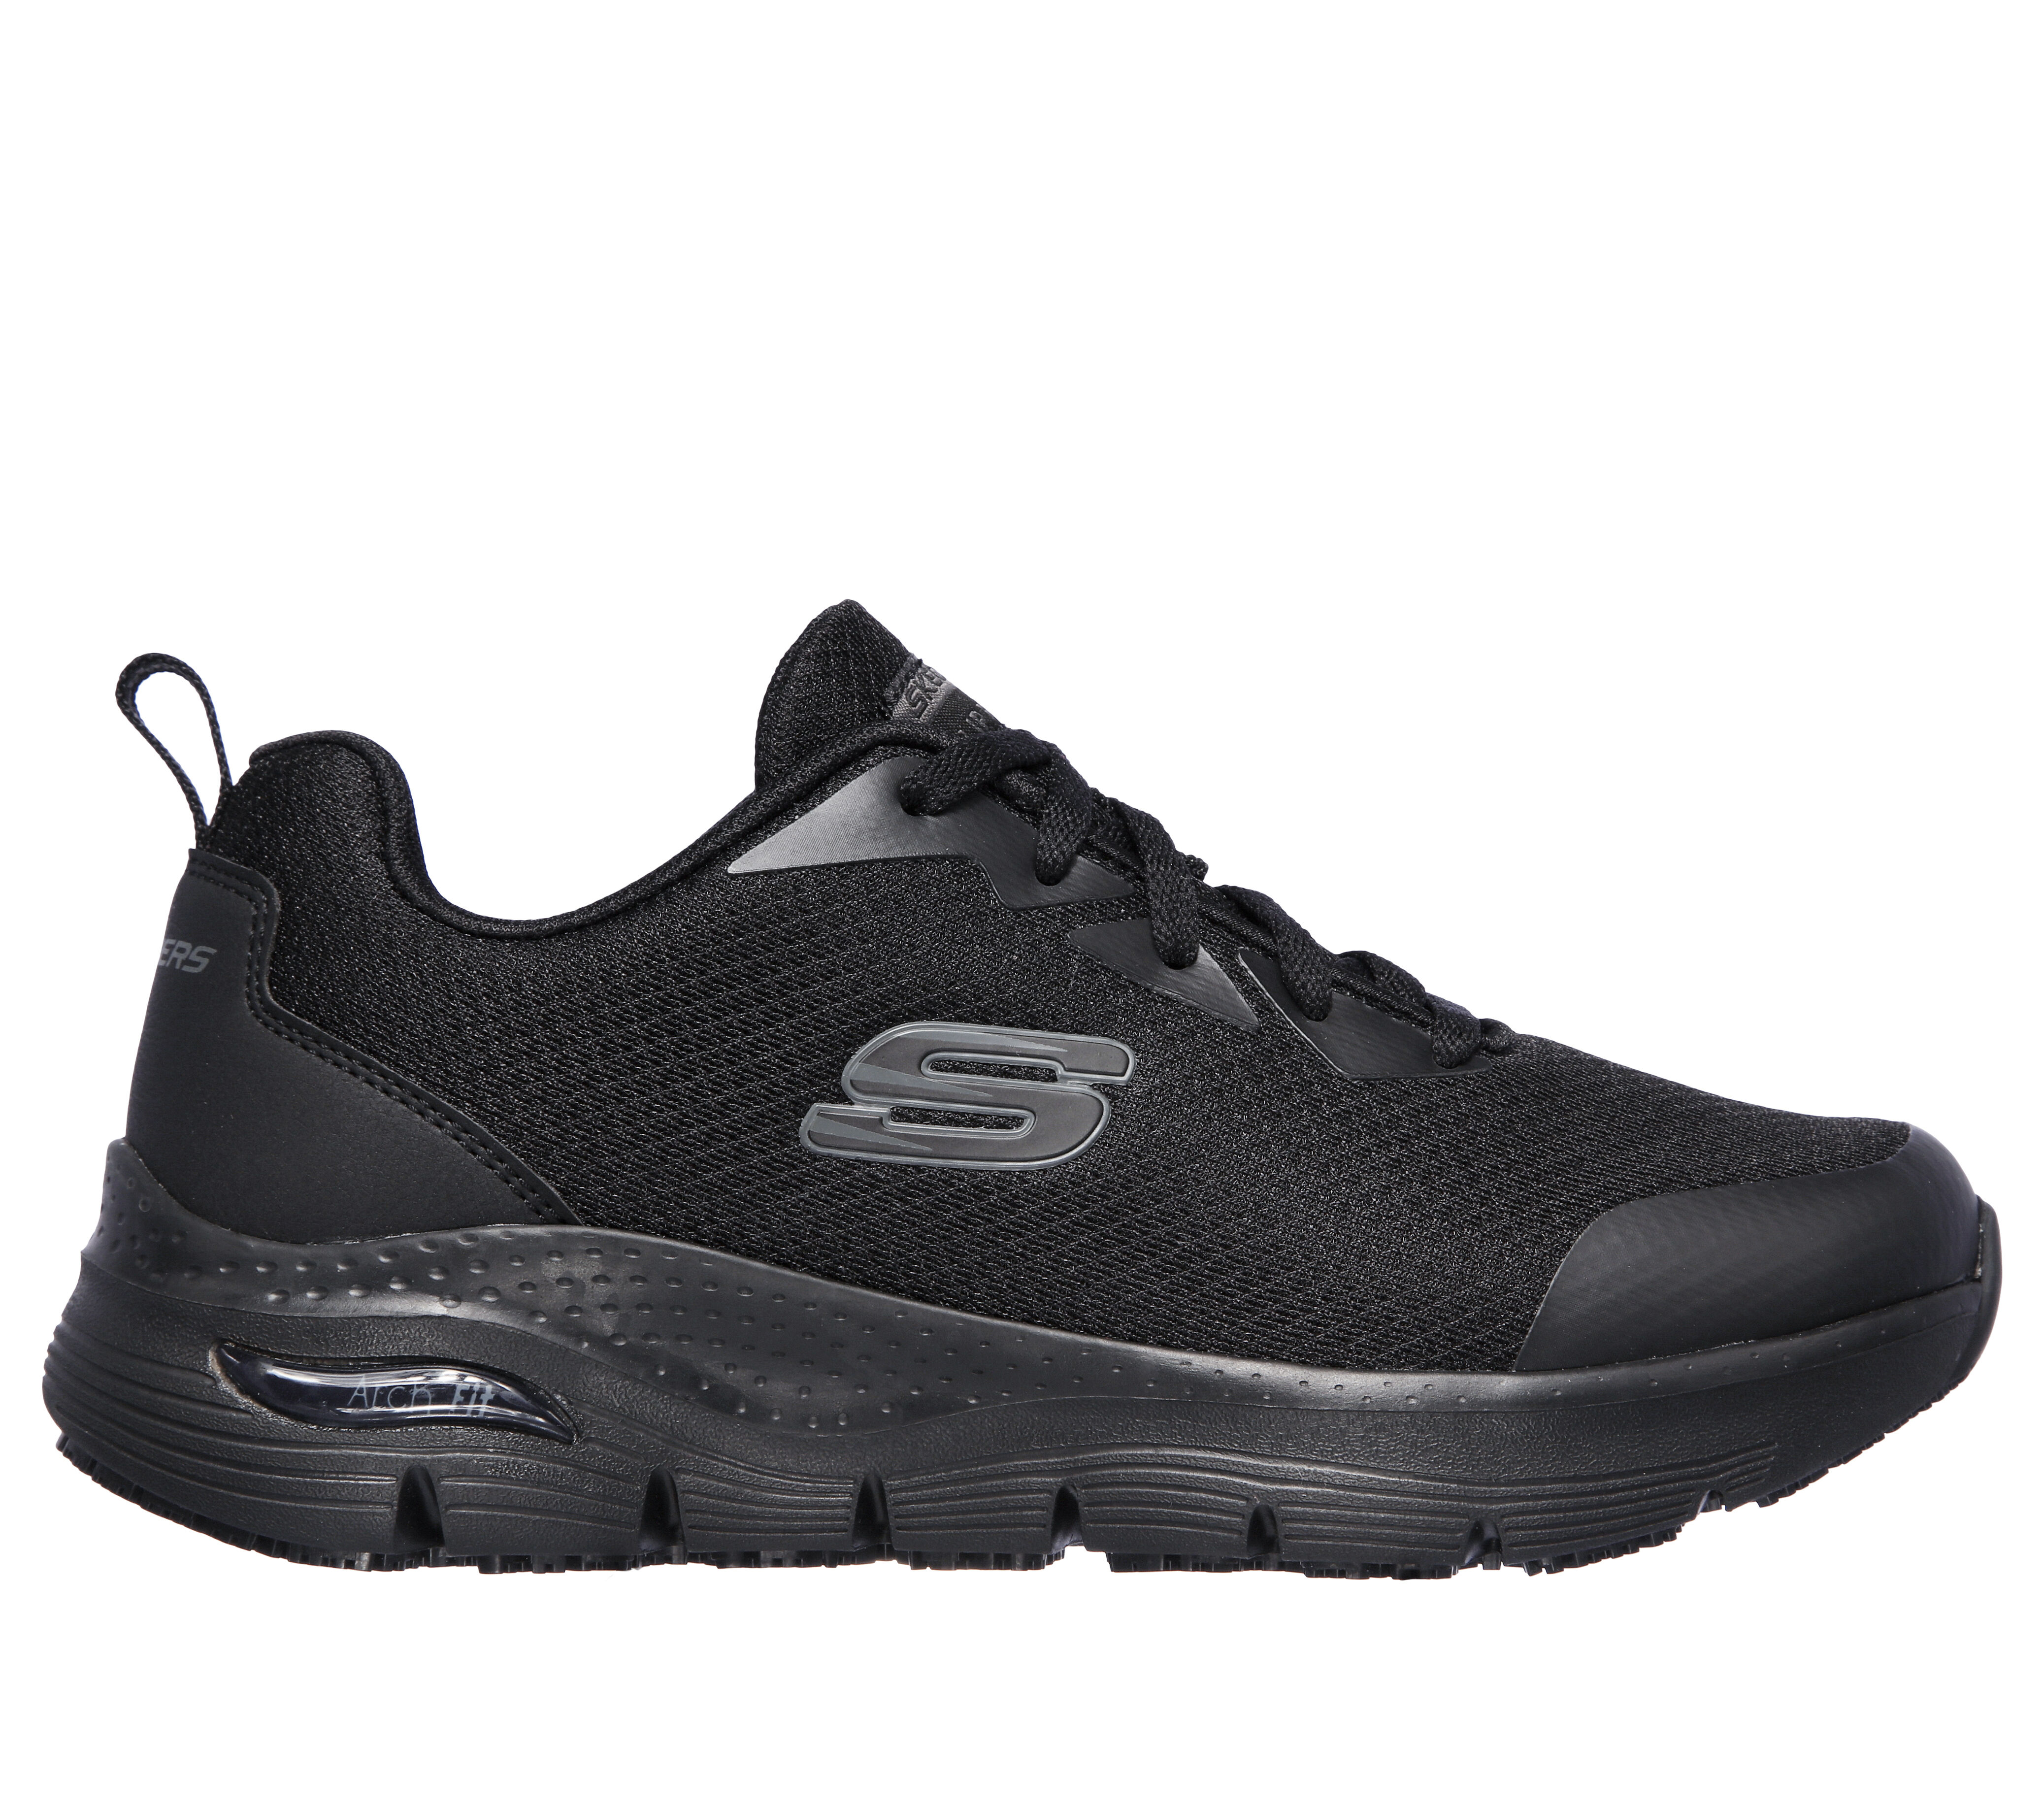 slip resistant shoes with arch support